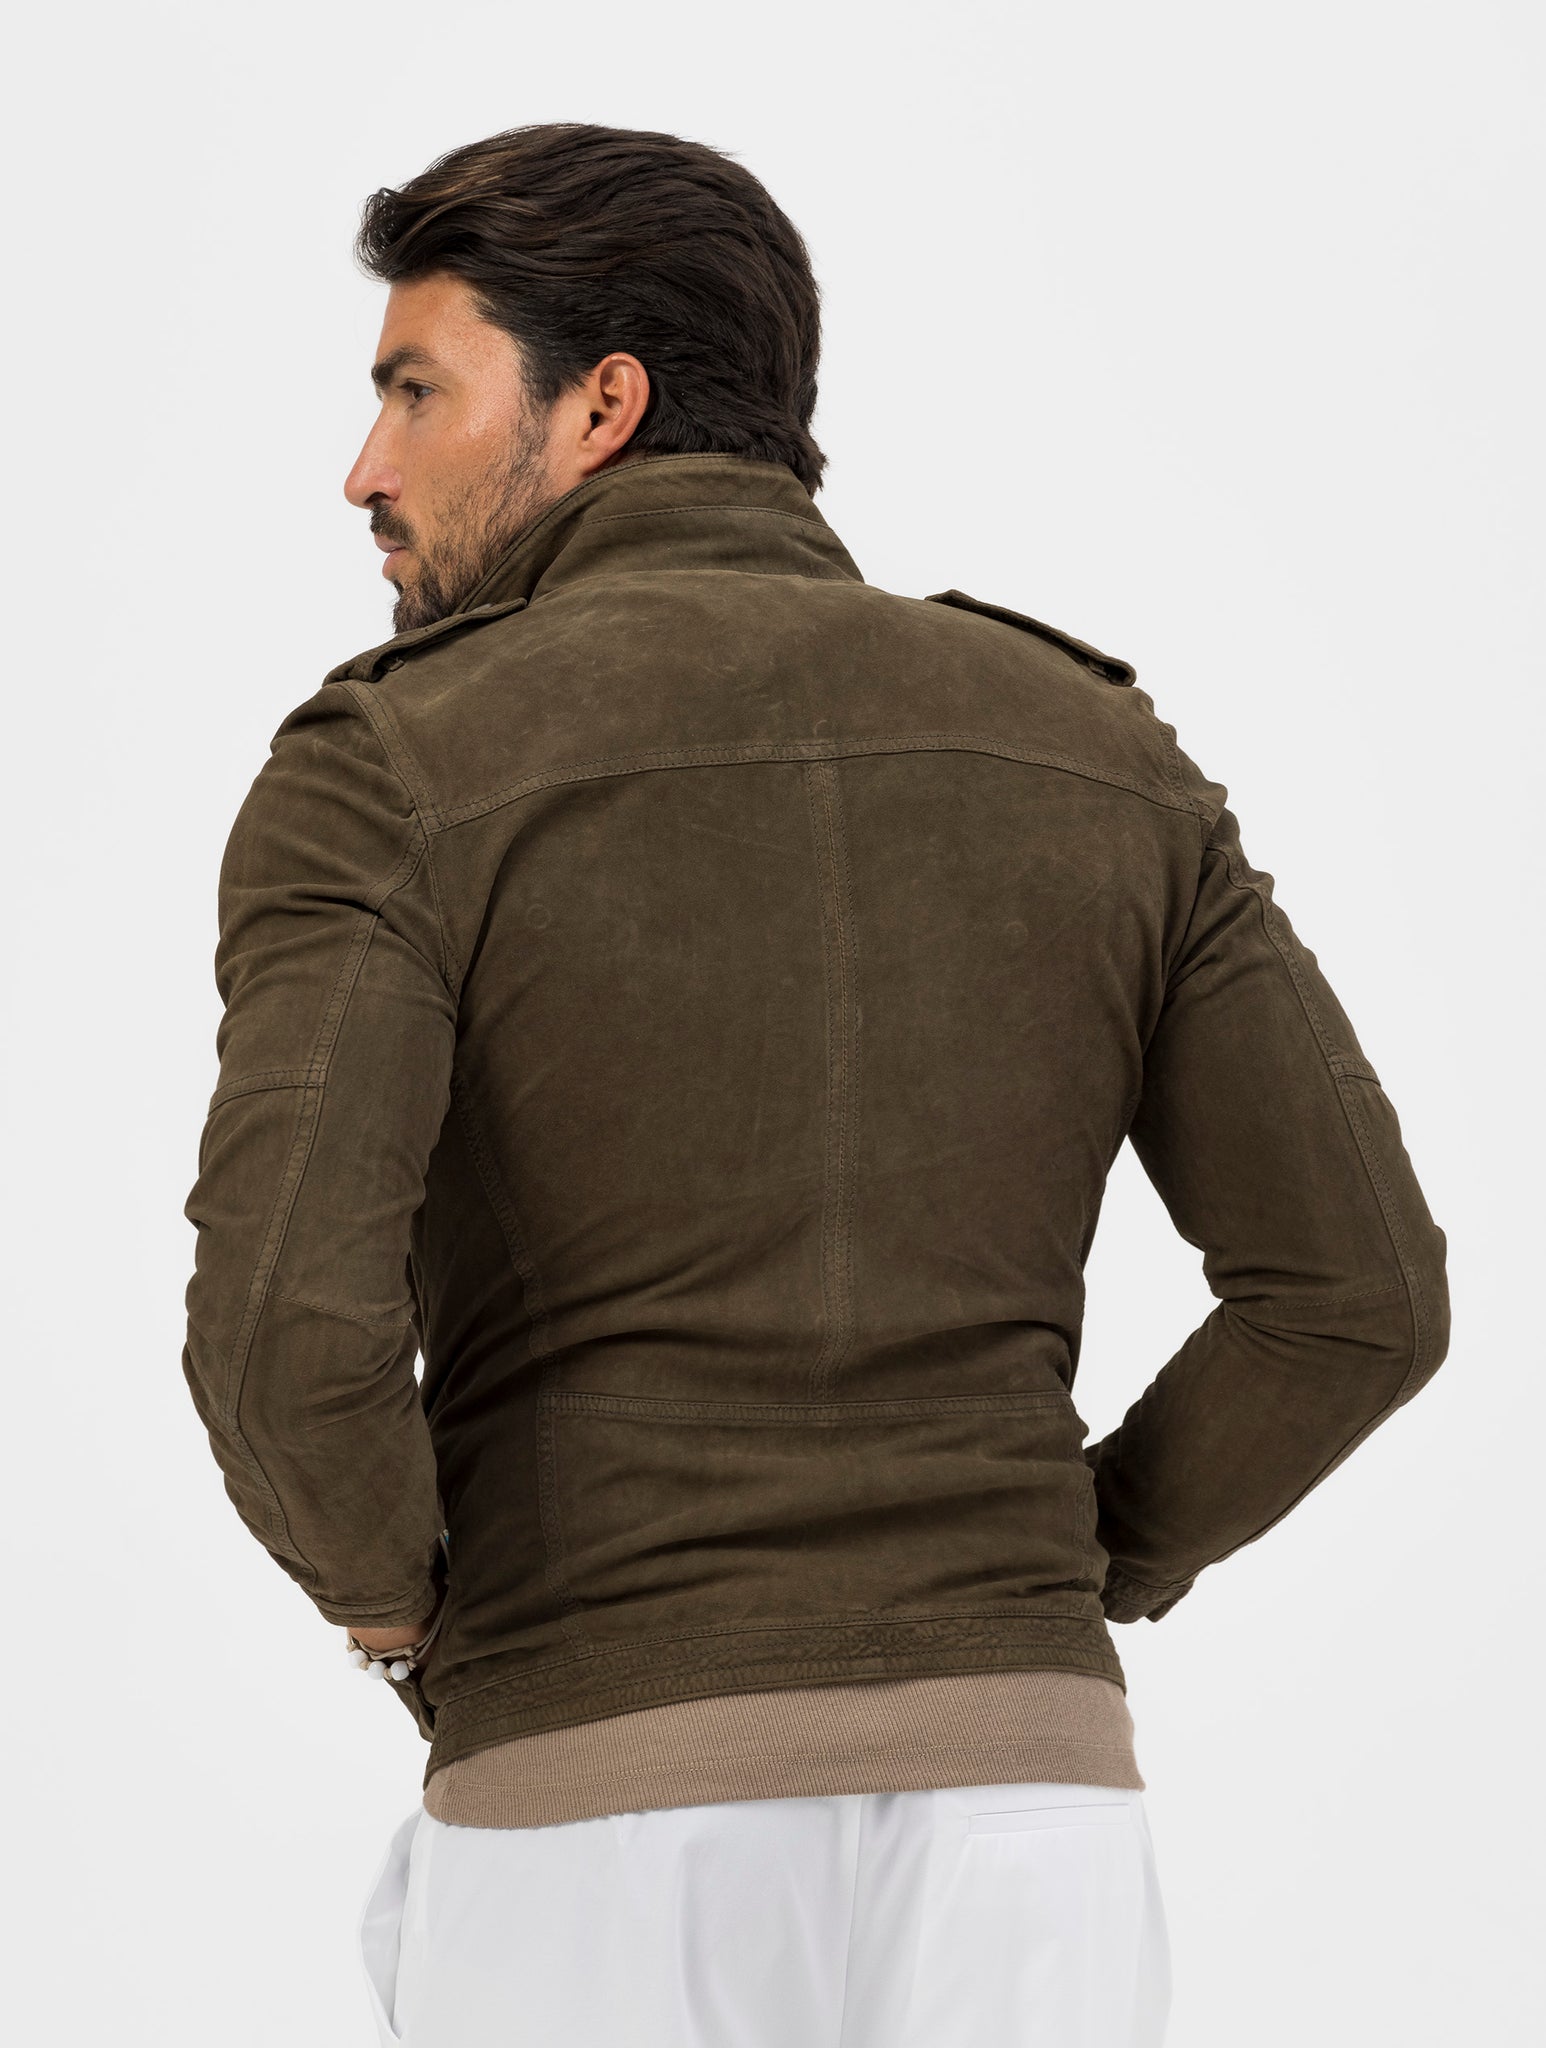 INDIAN SCOUT LEATHER JACKET IN MILITARY GREEN